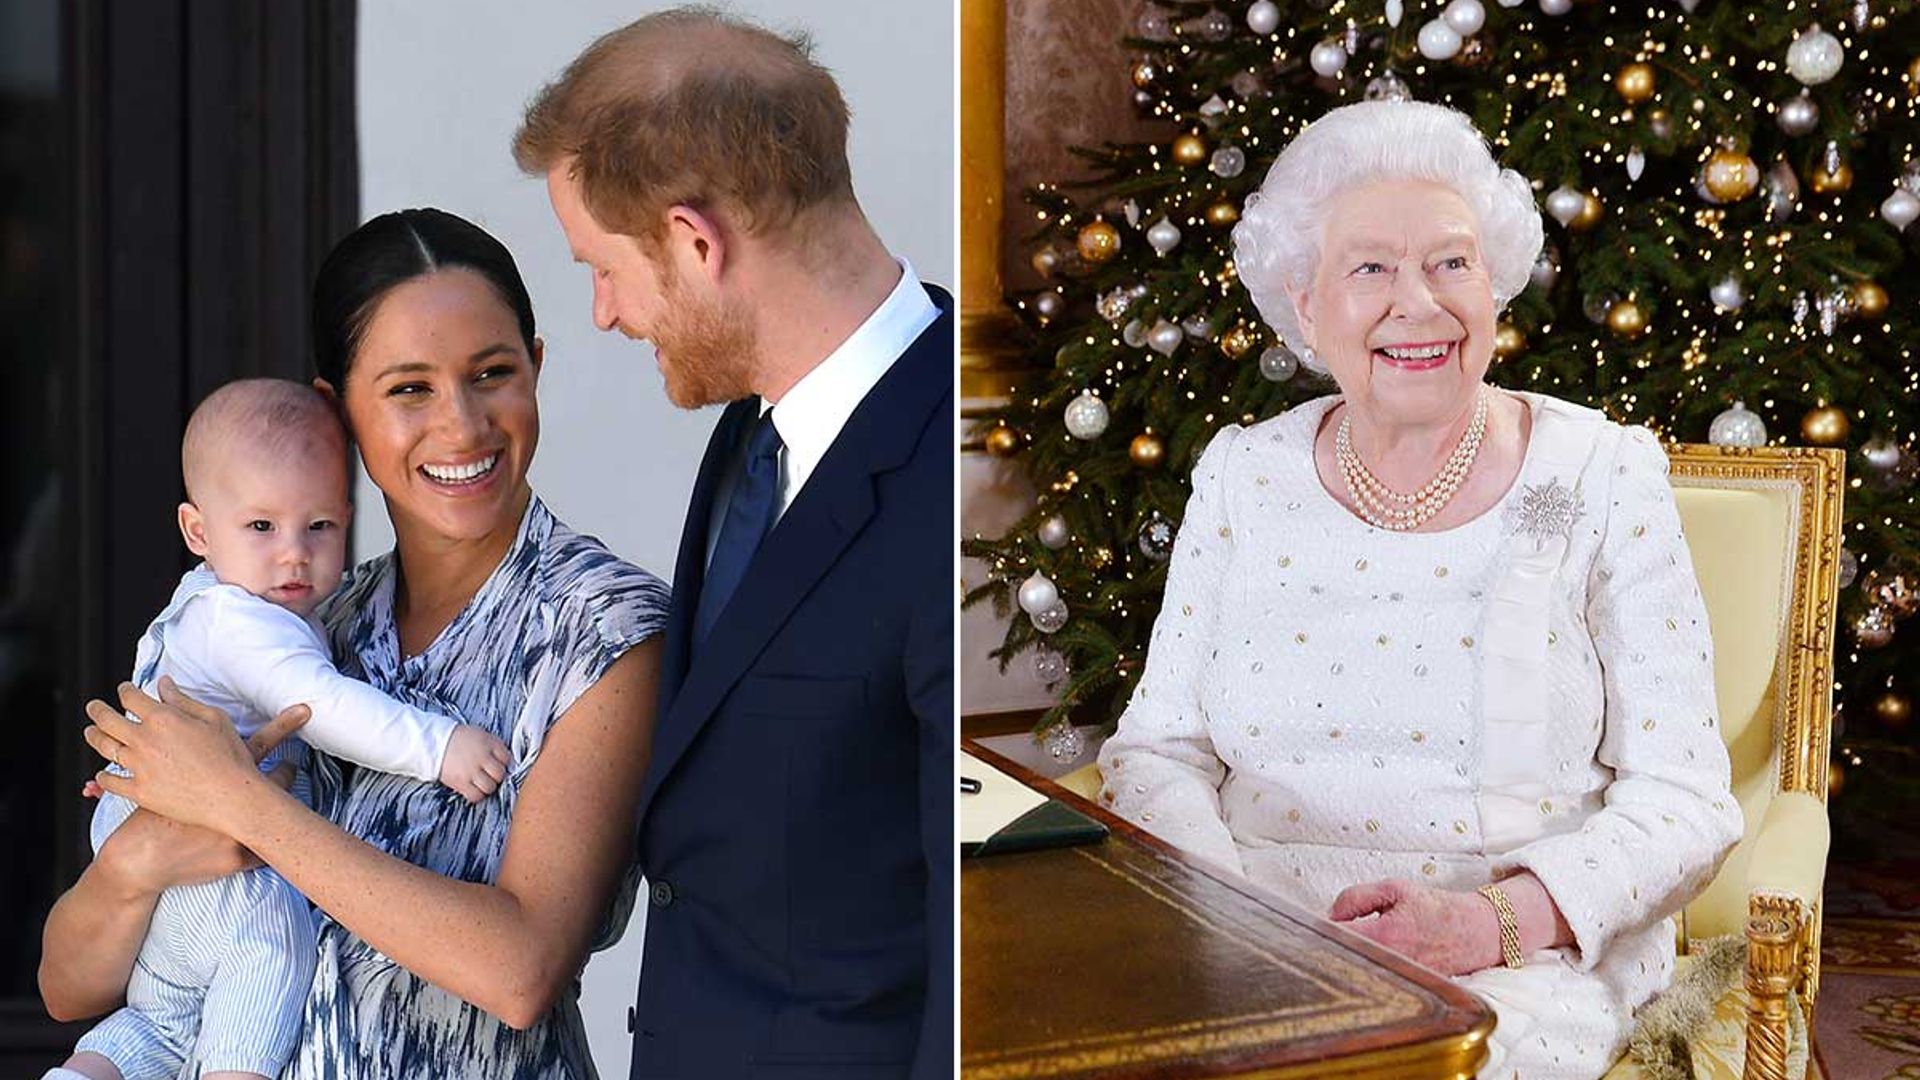 Meghan Markle requested this unexpected Christmas present for Archie from the Queen